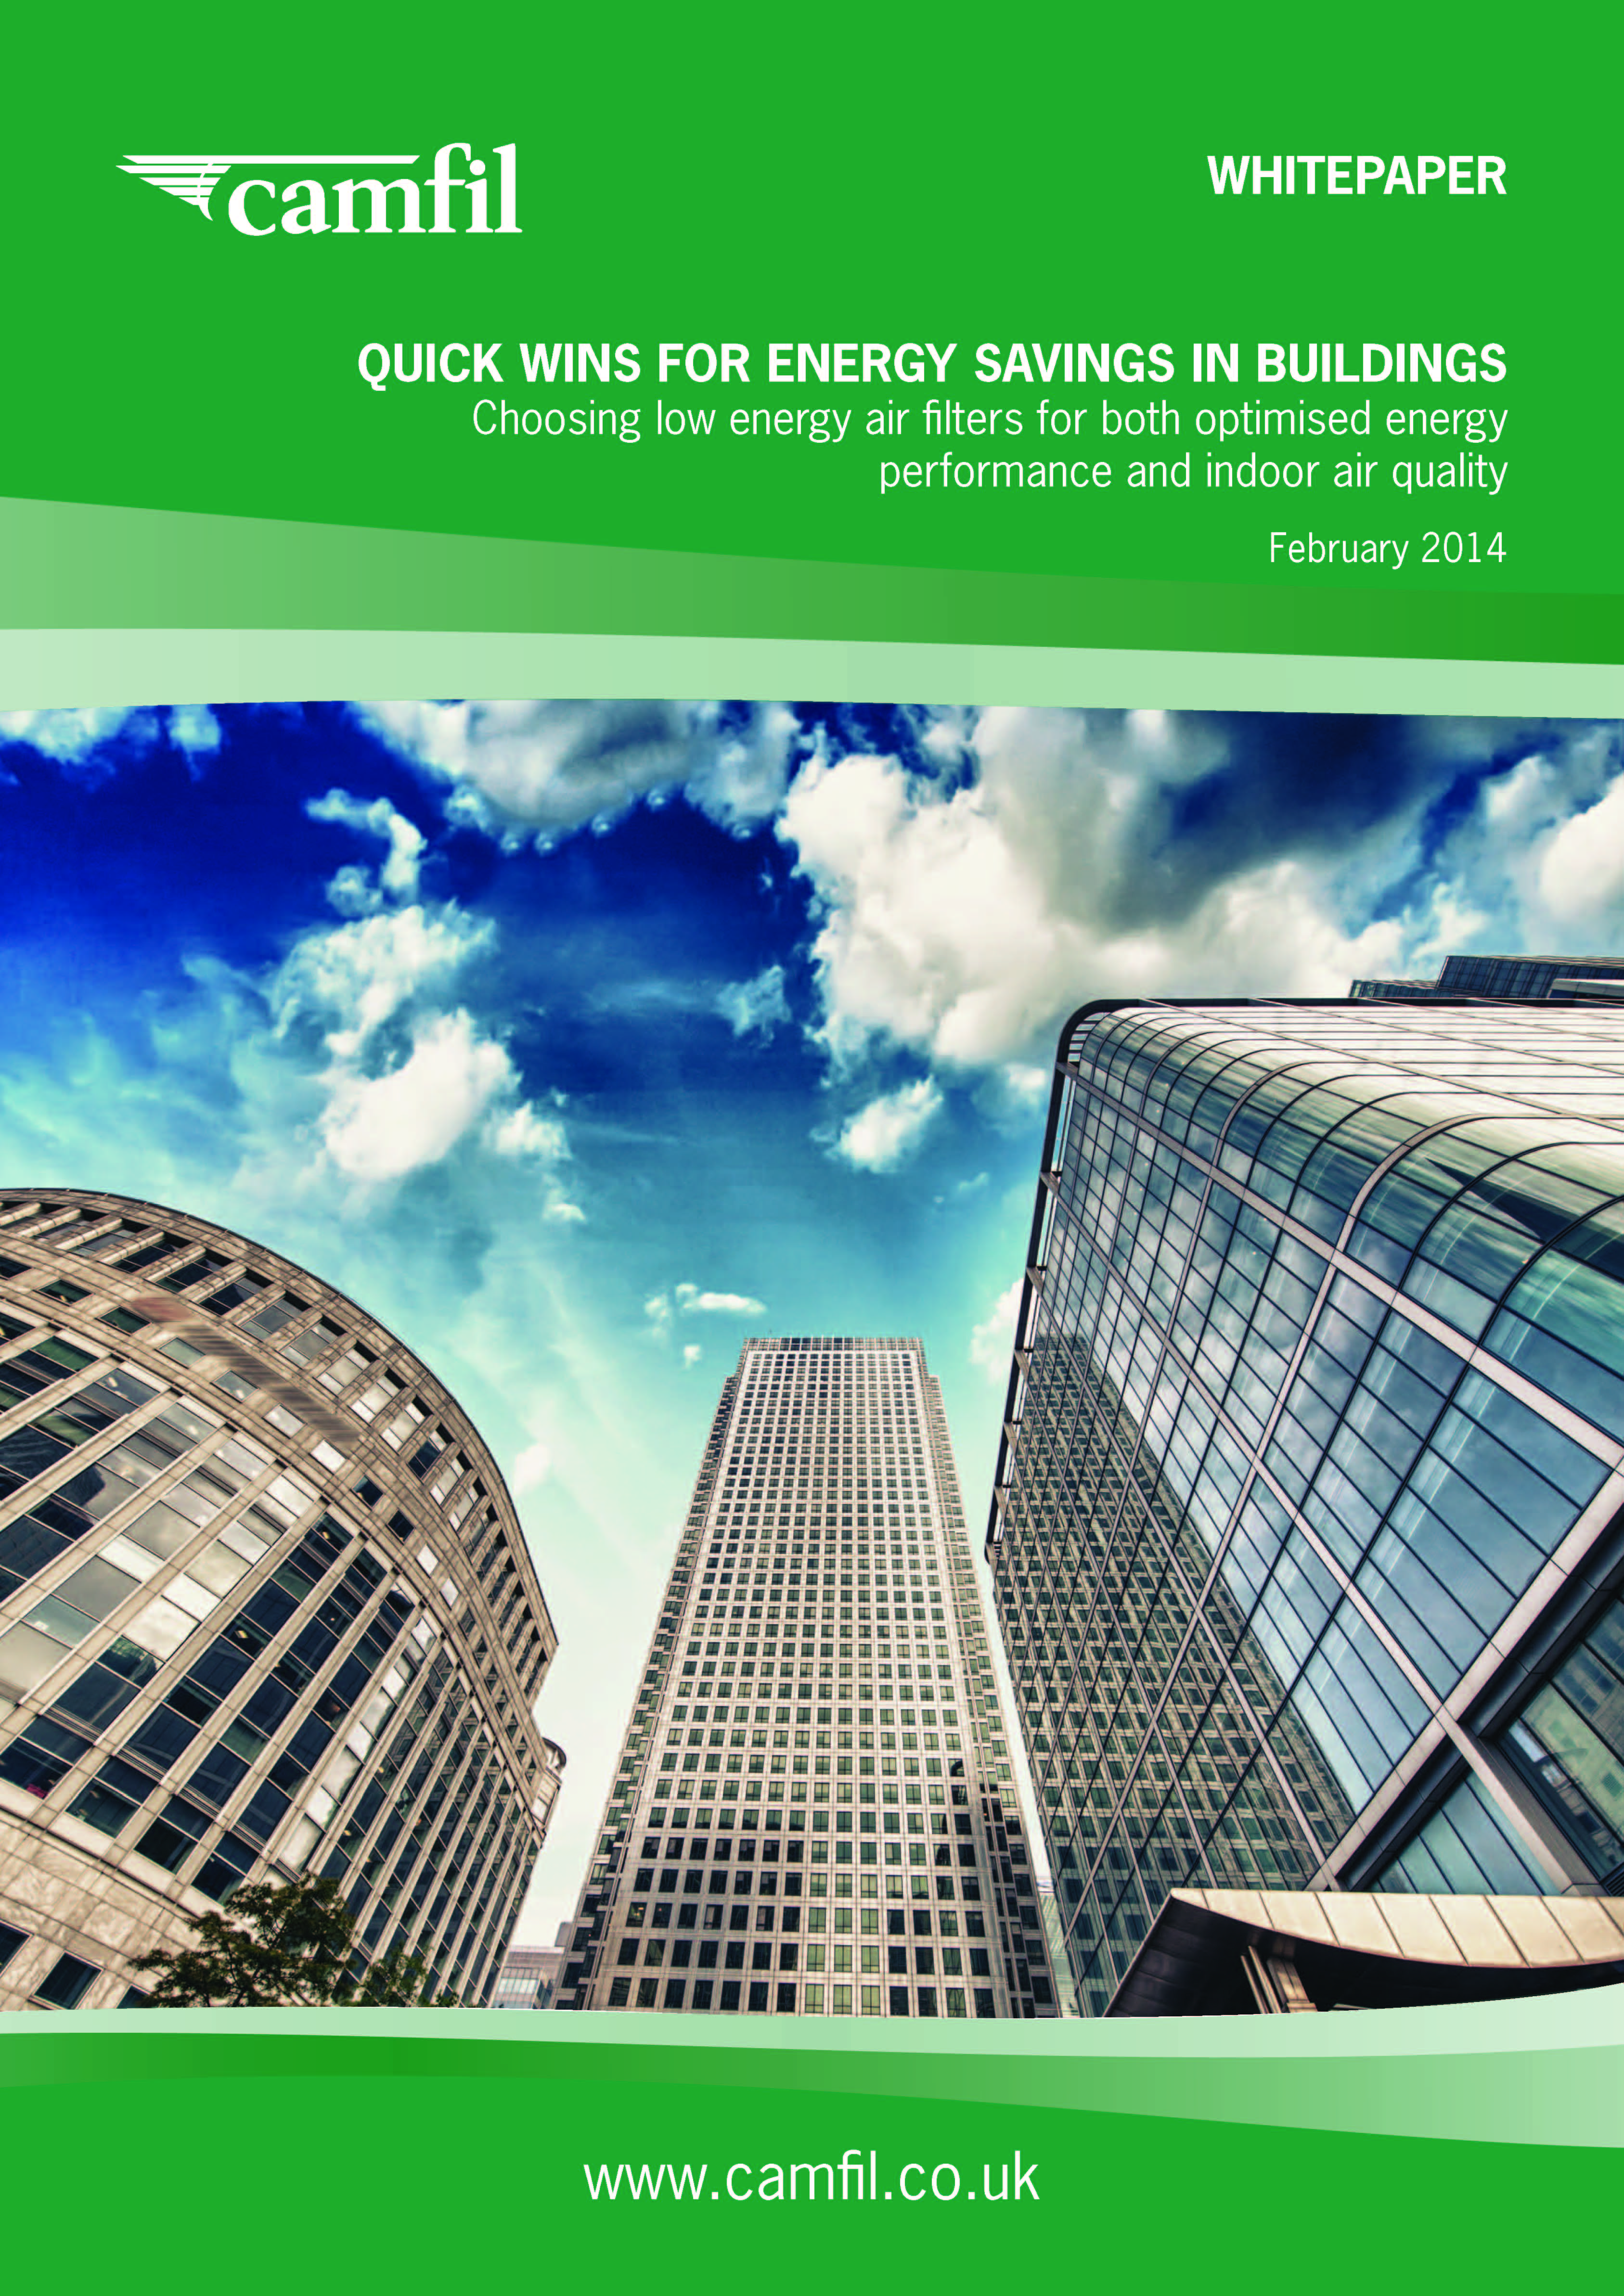 Low energy air filters: Quick wins for energy savings in buildings